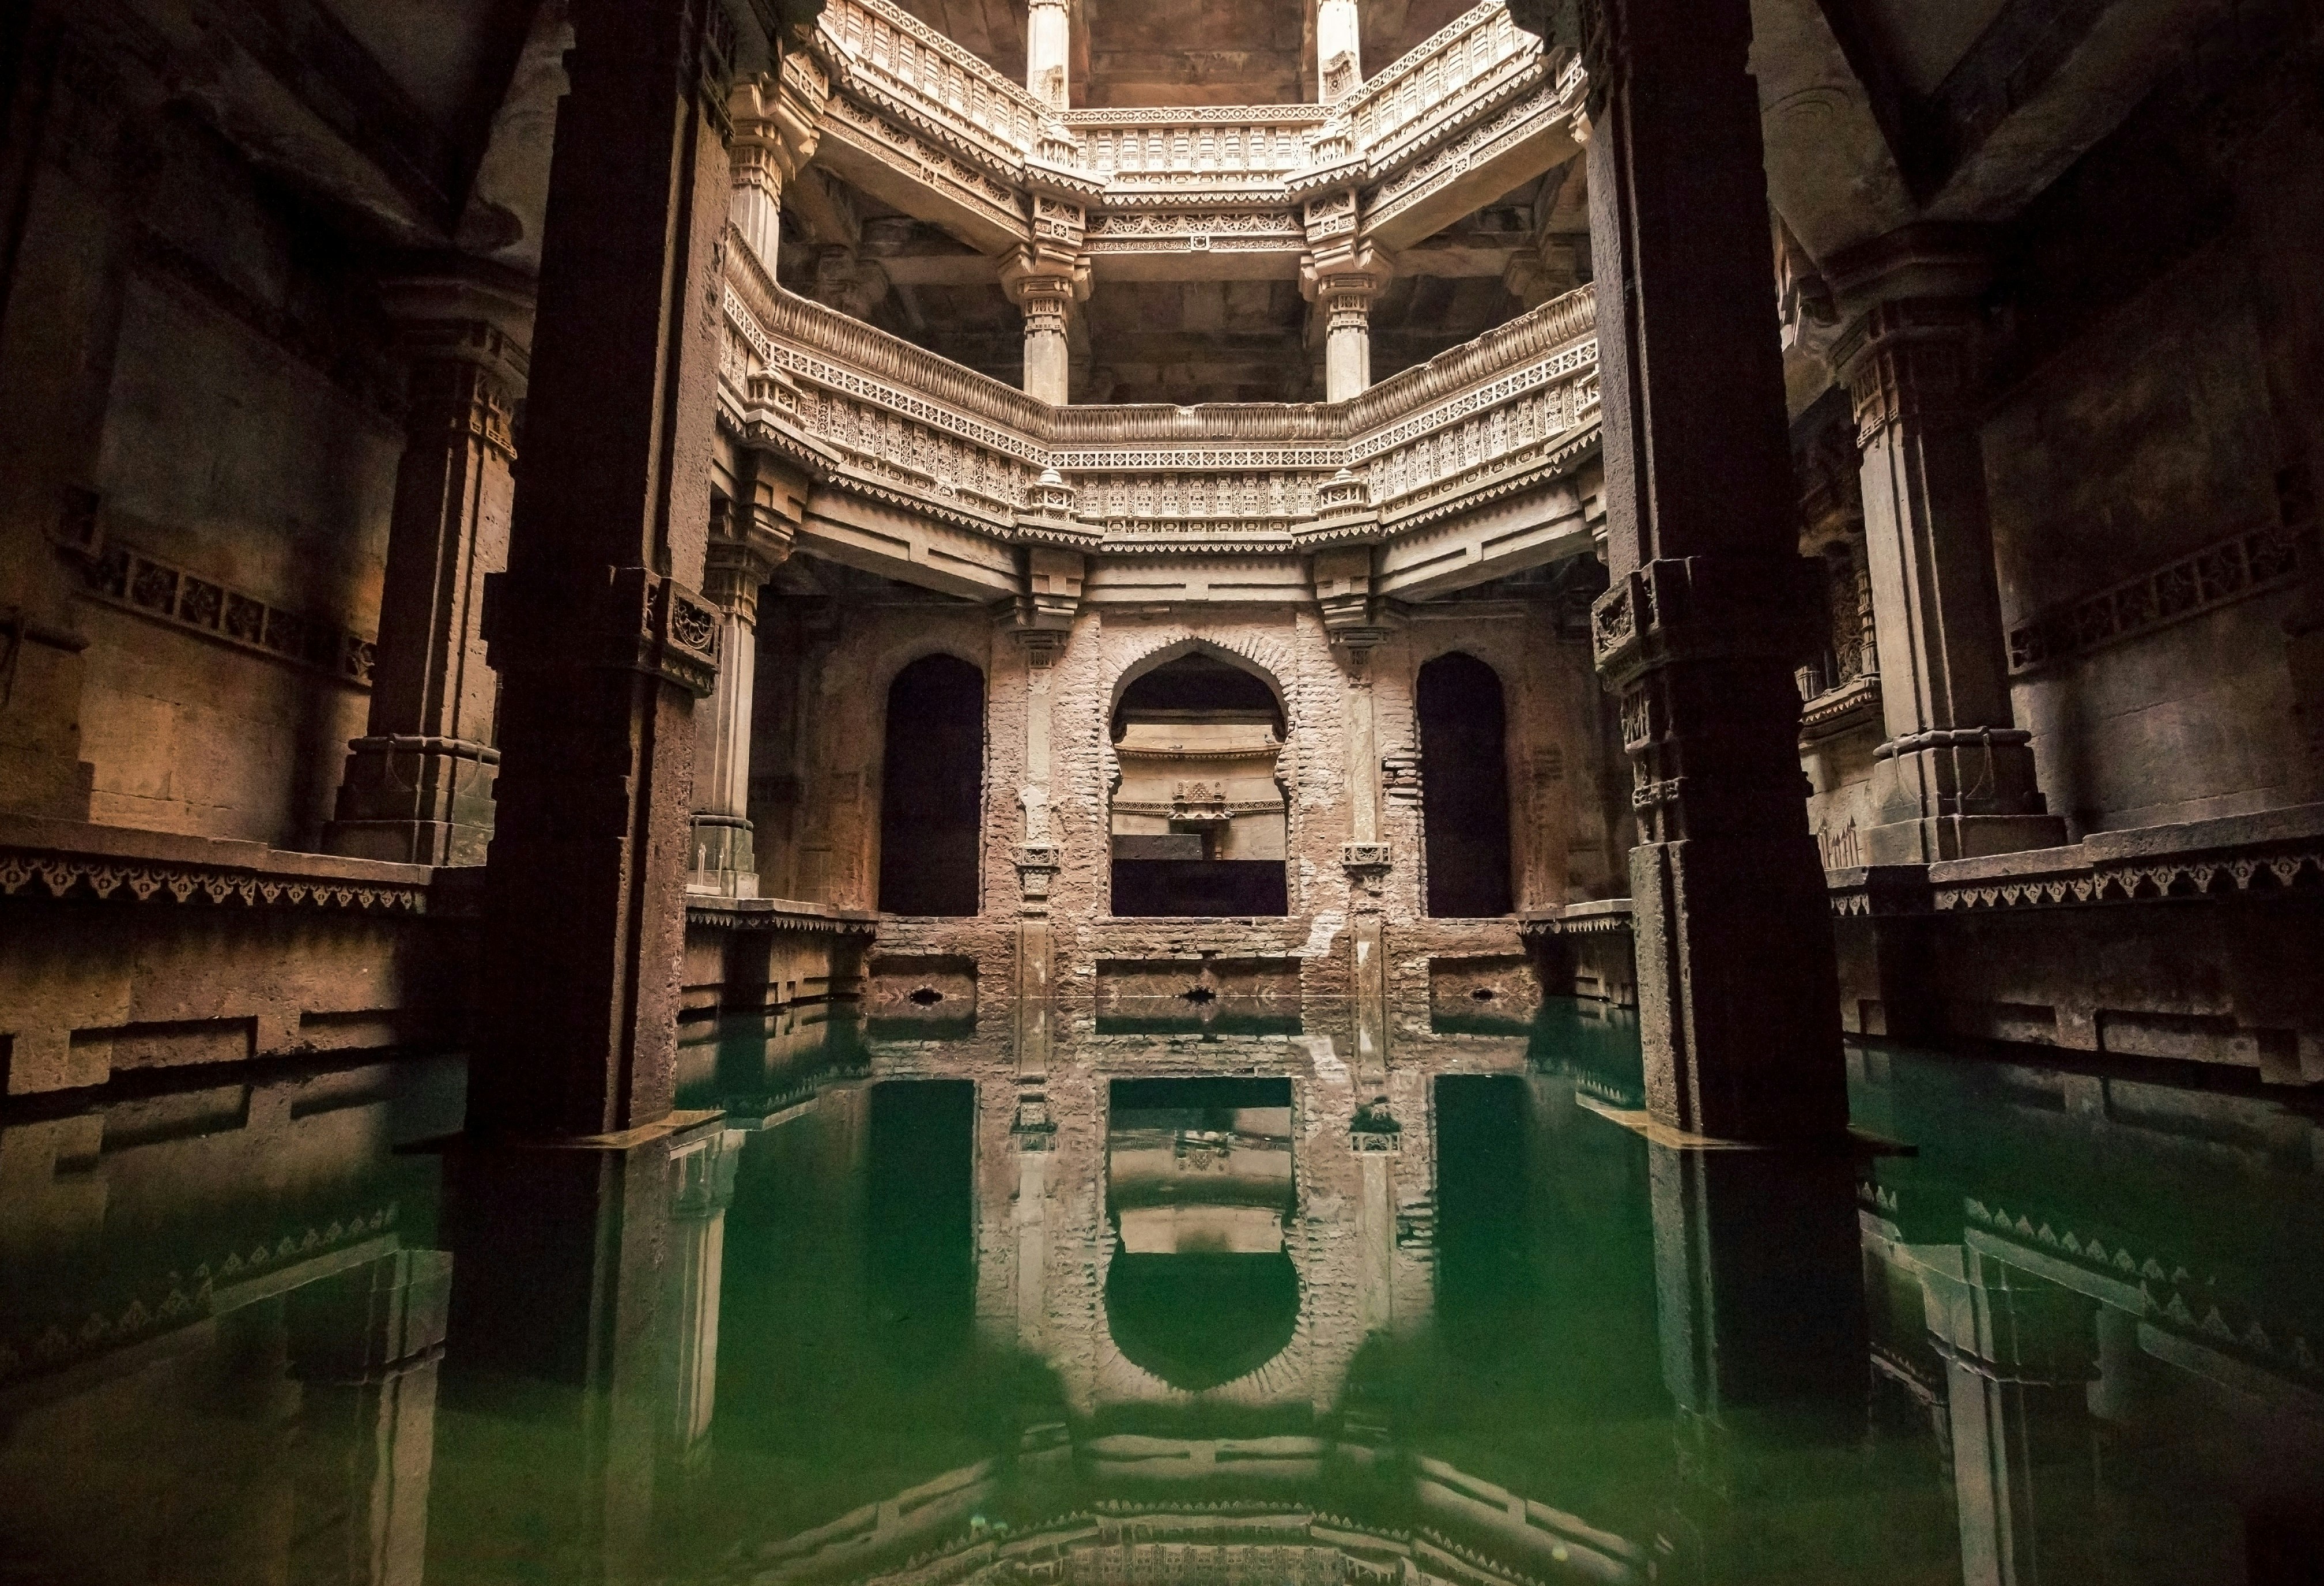 The interior of Adalaj Vav stepwell. The image is taken on the bottom of the stepwell, with the floor submerged in turquoise water. Light shines down from above, indicating it is the main shaft of the well.